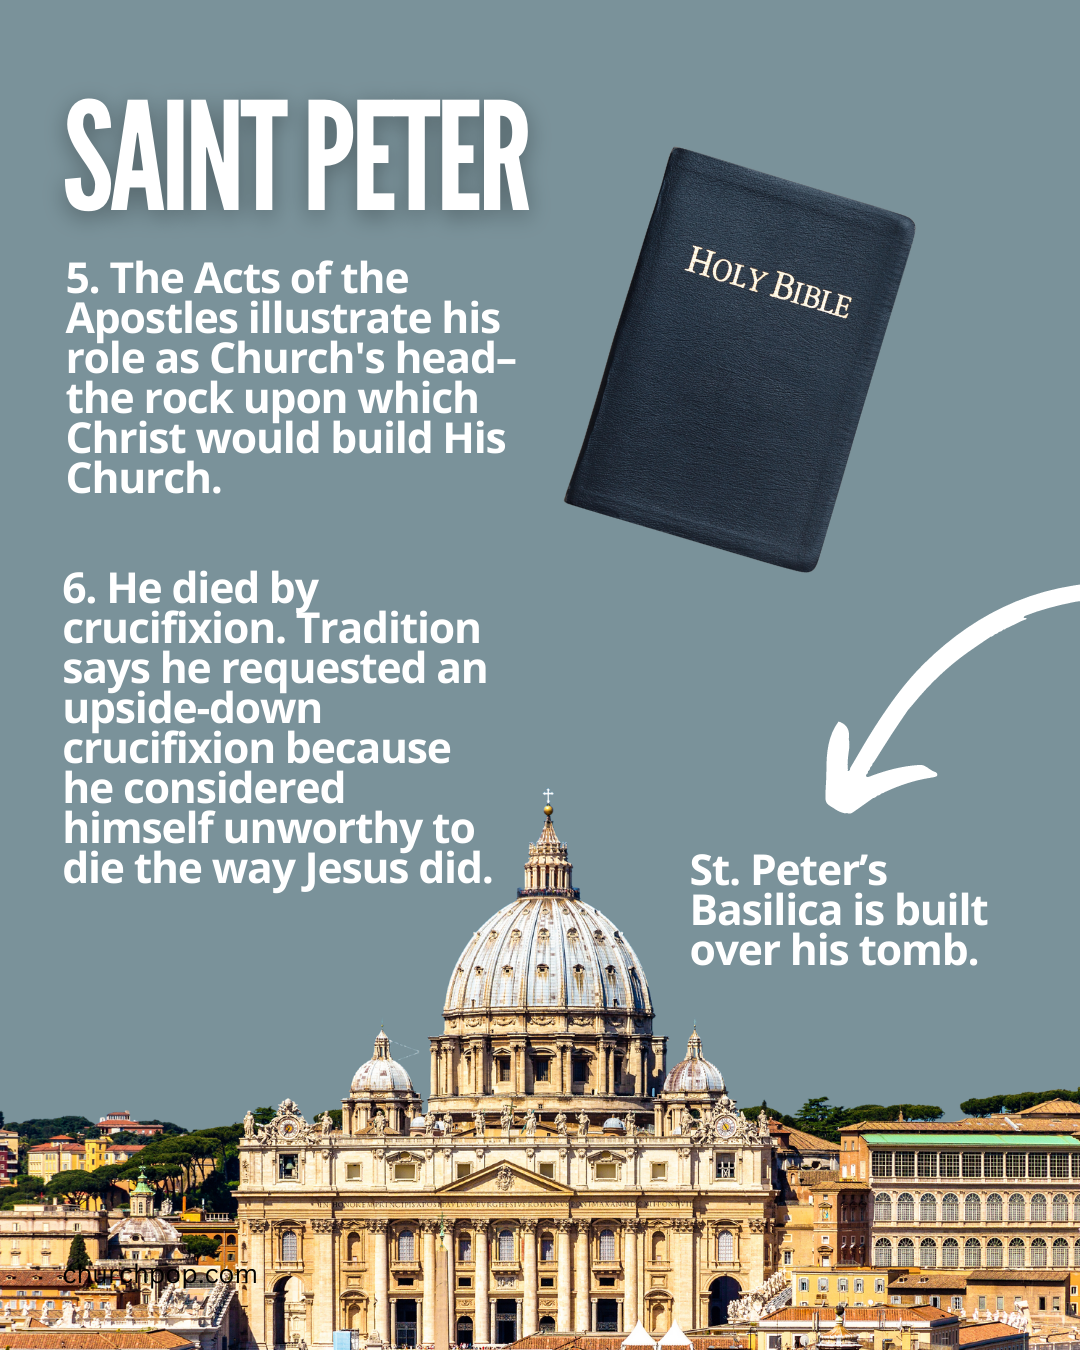 St. Peters Basilica facts